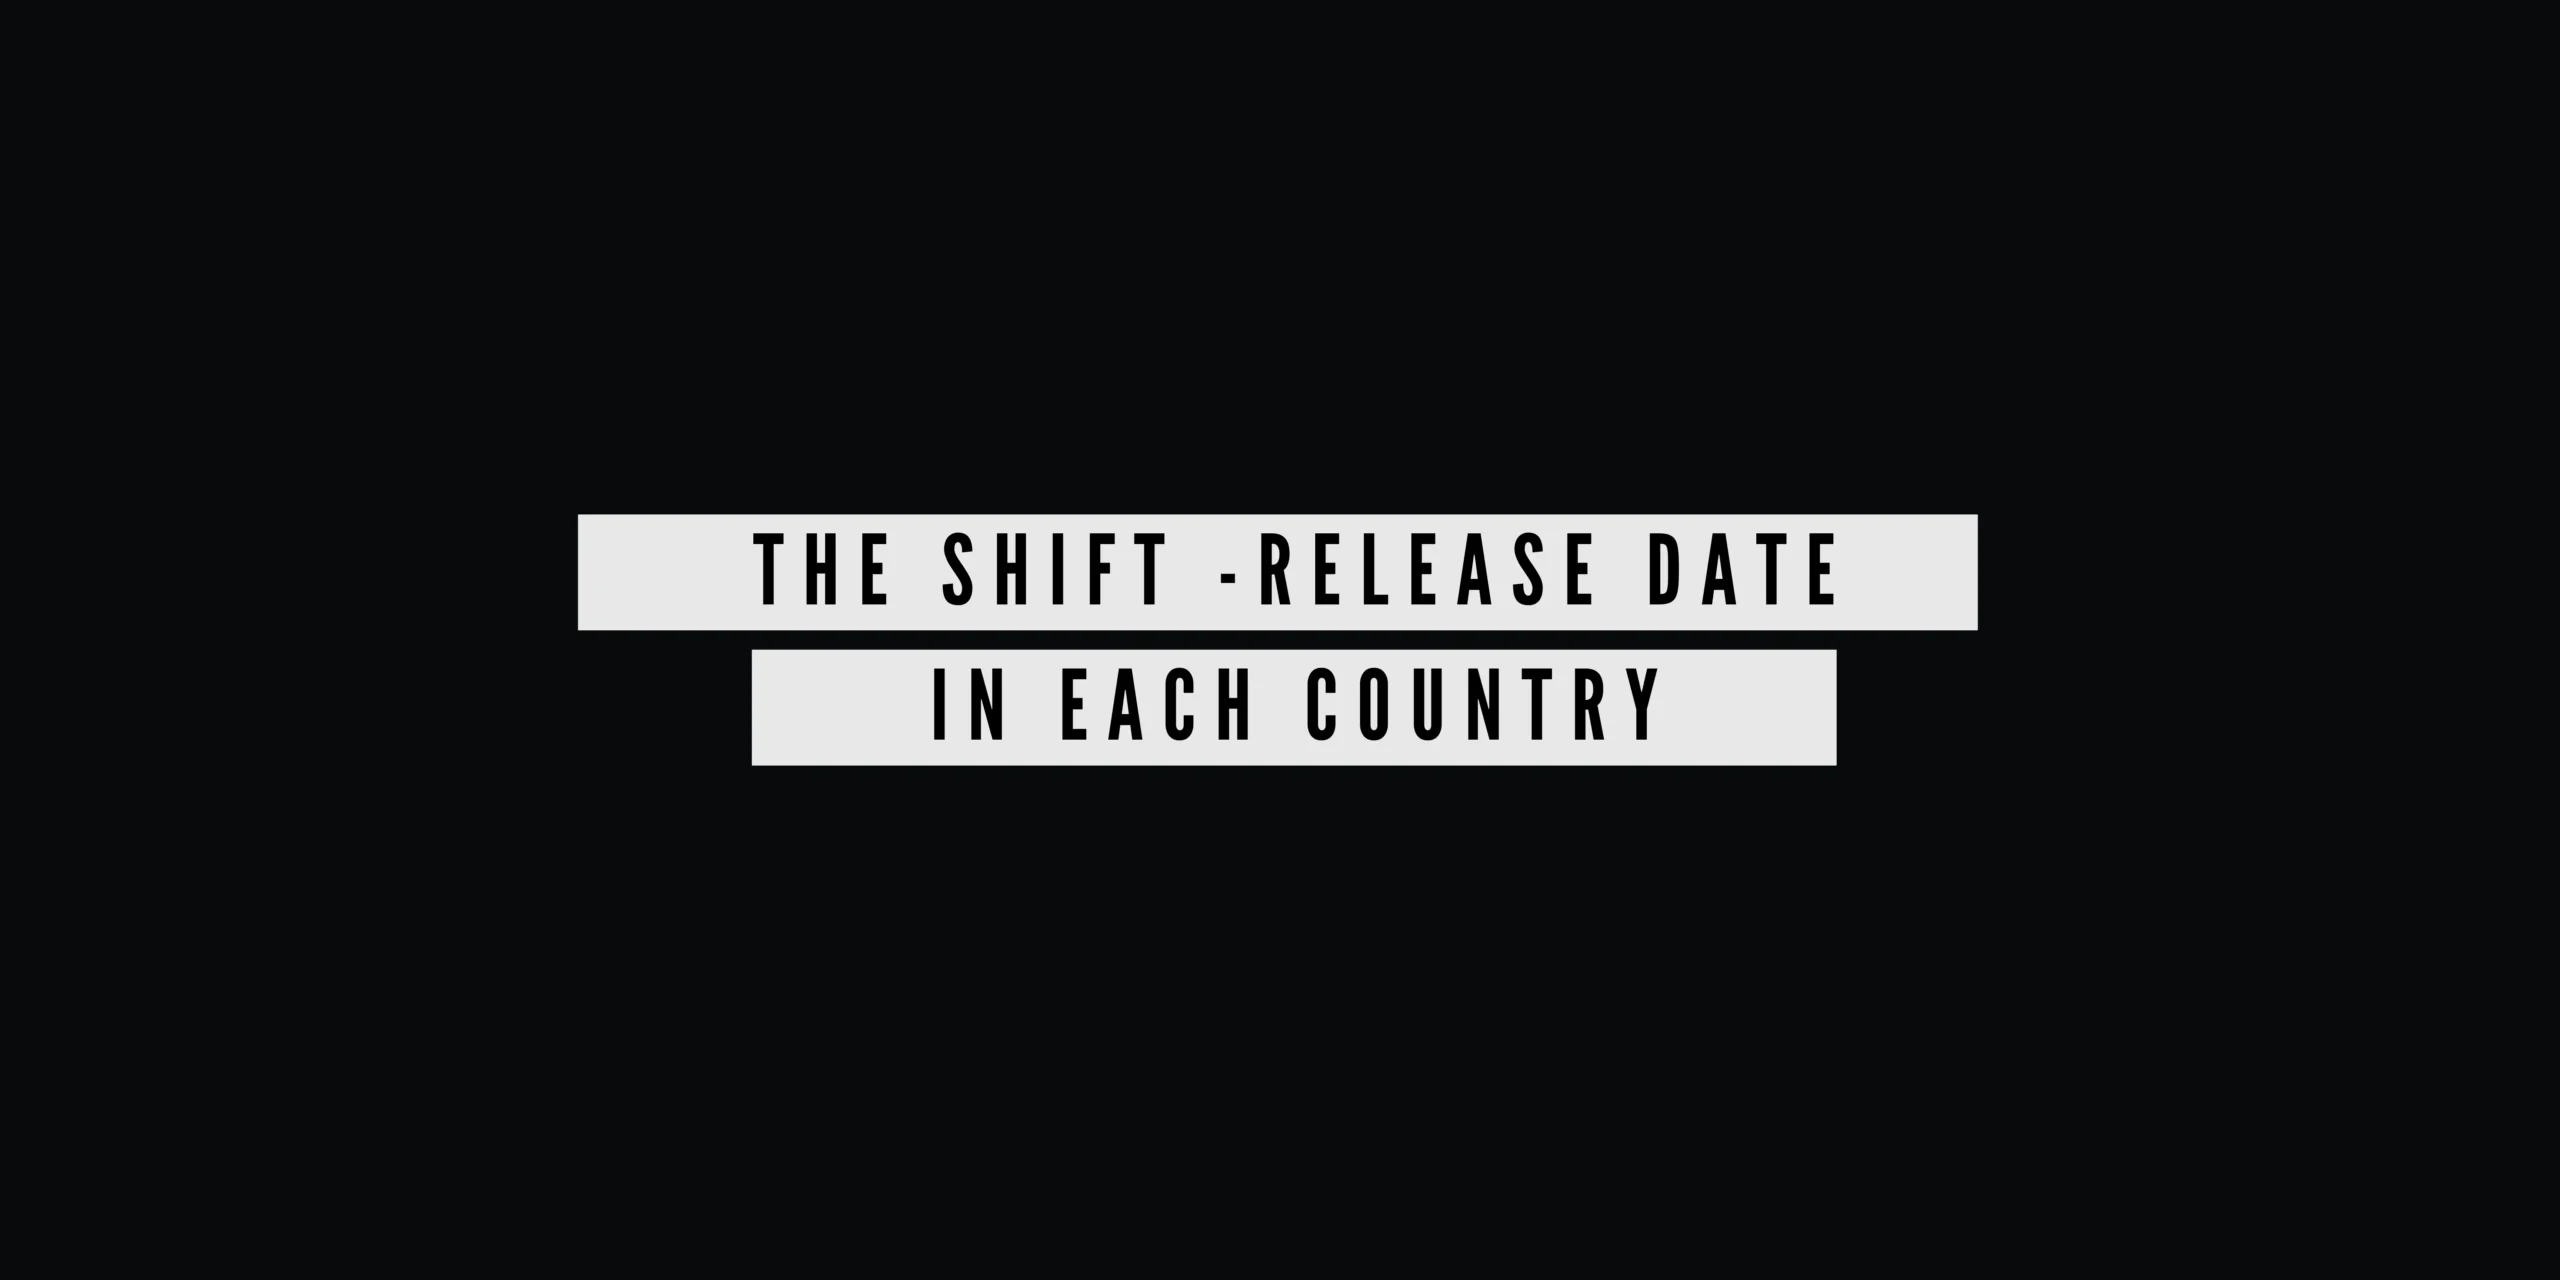 The Shift -Release Date In Each Country